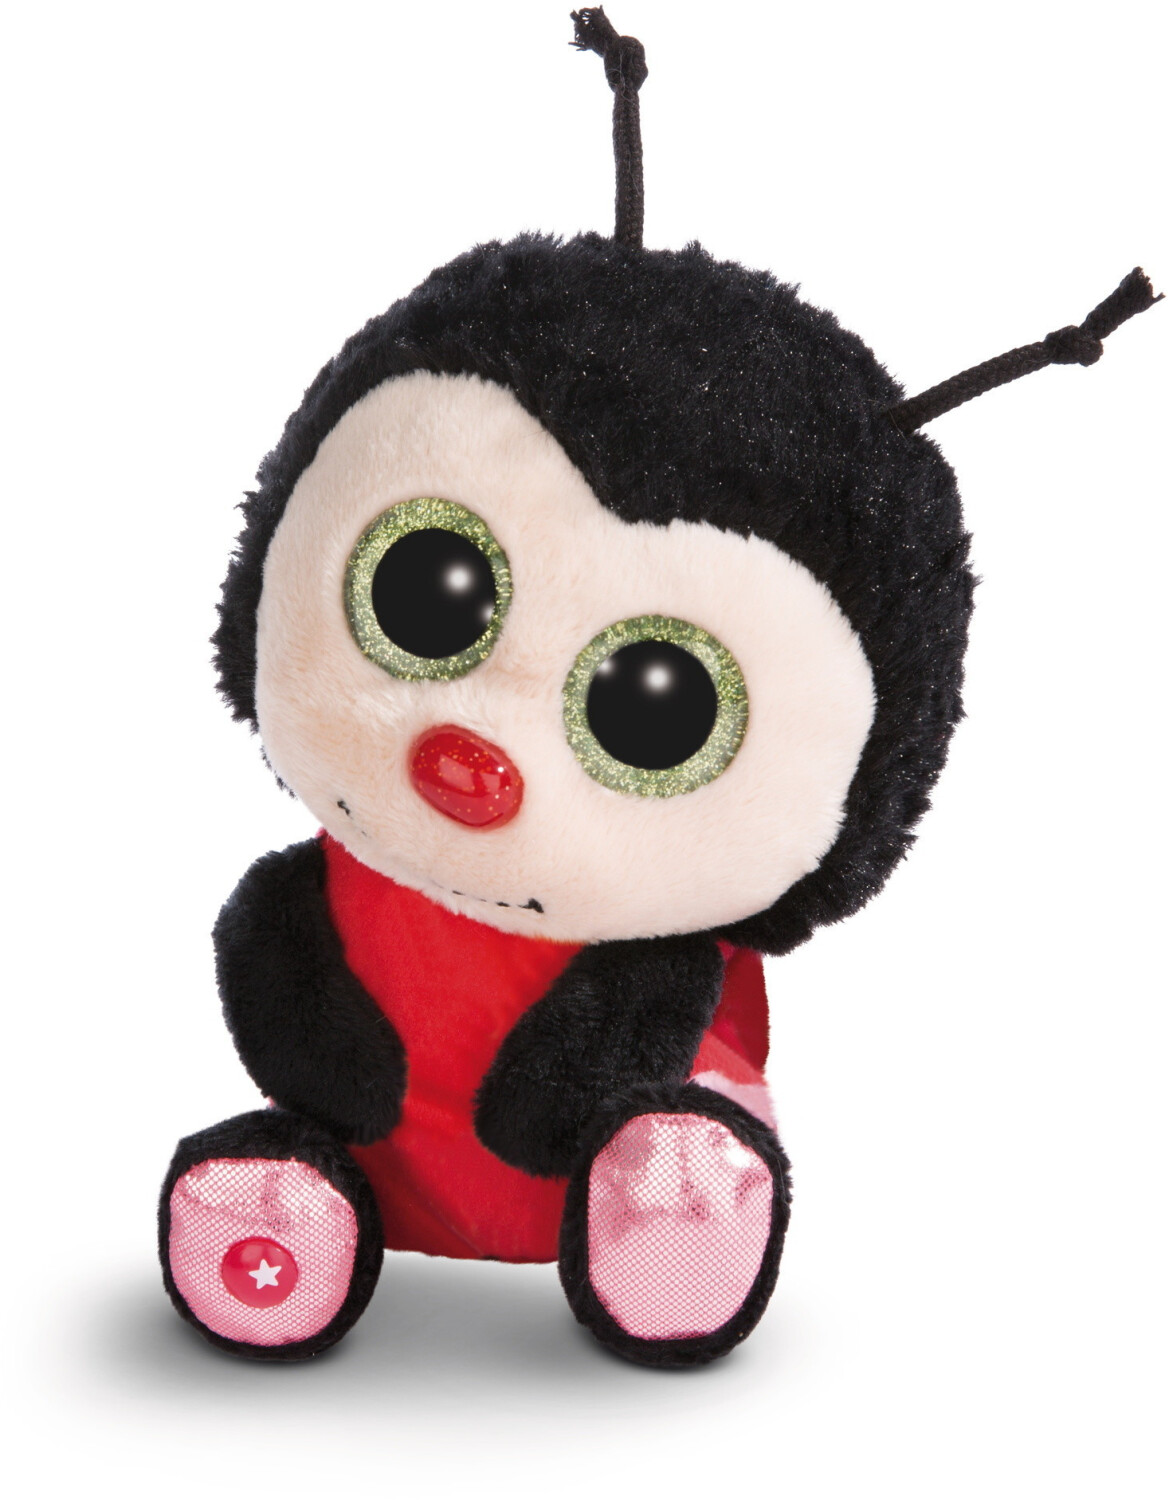 Photos - Soft Toy NICI Glubschis 15 cm Ladybug Lily May 